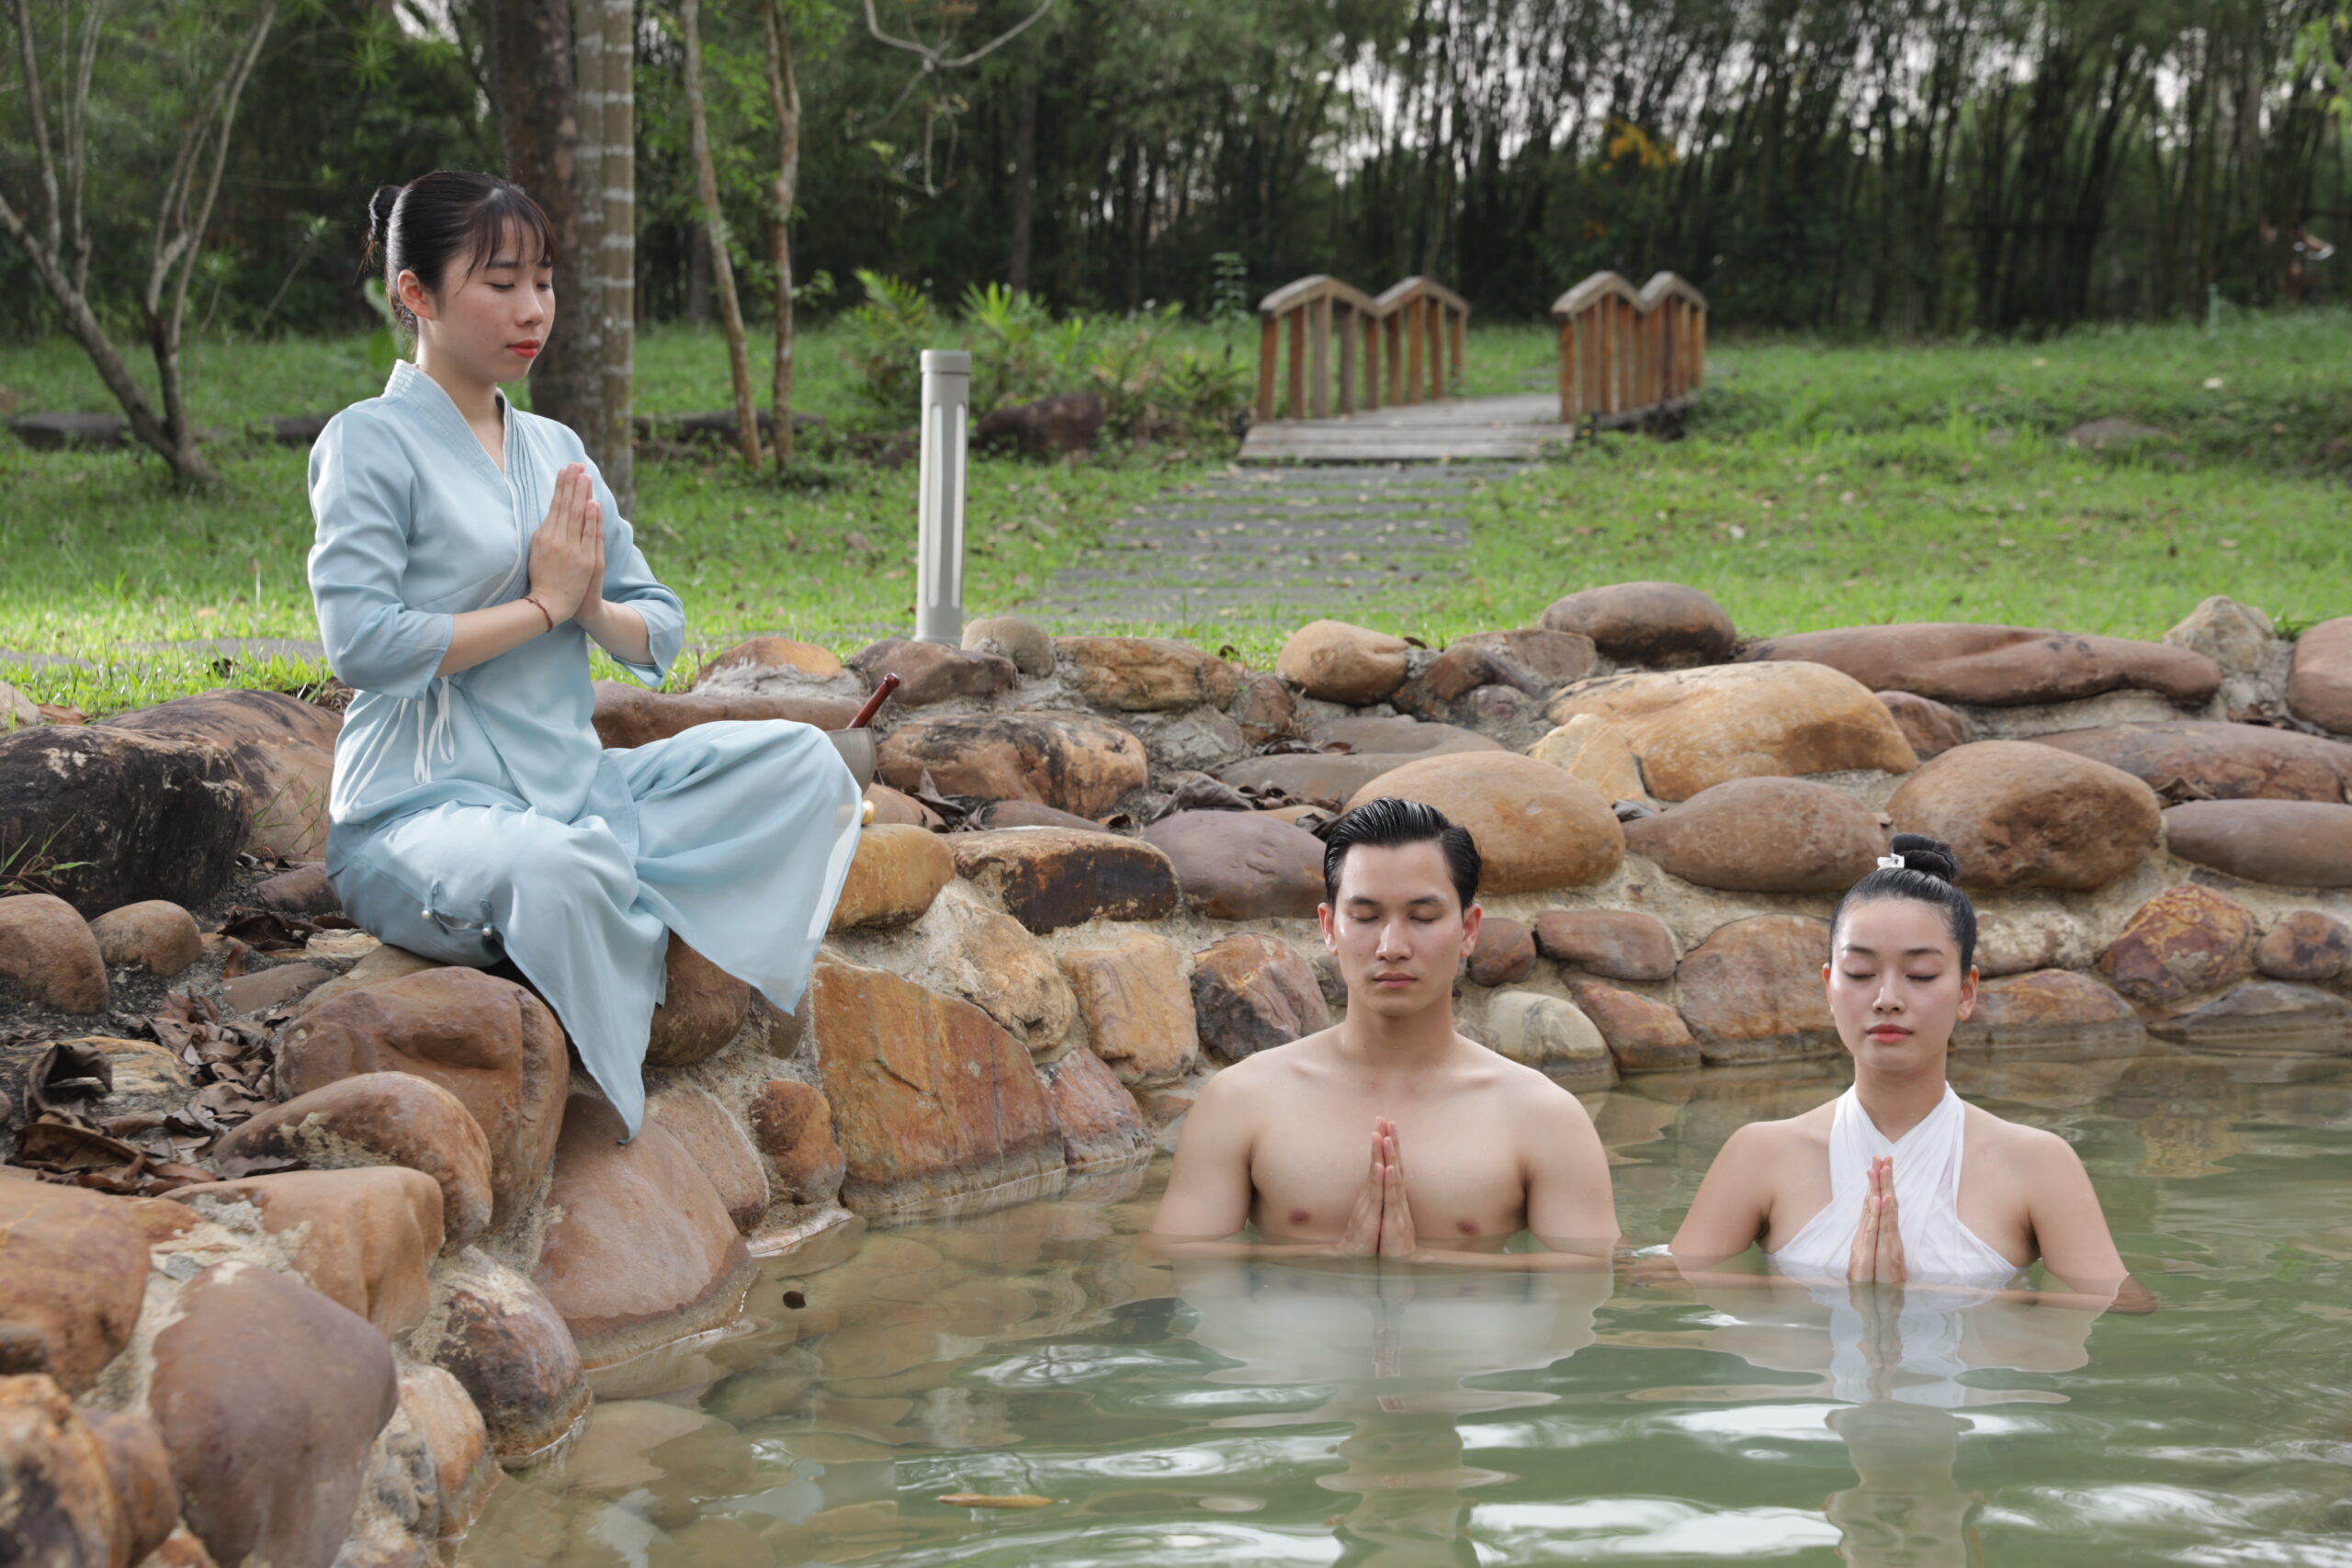 Three people in the hotspring